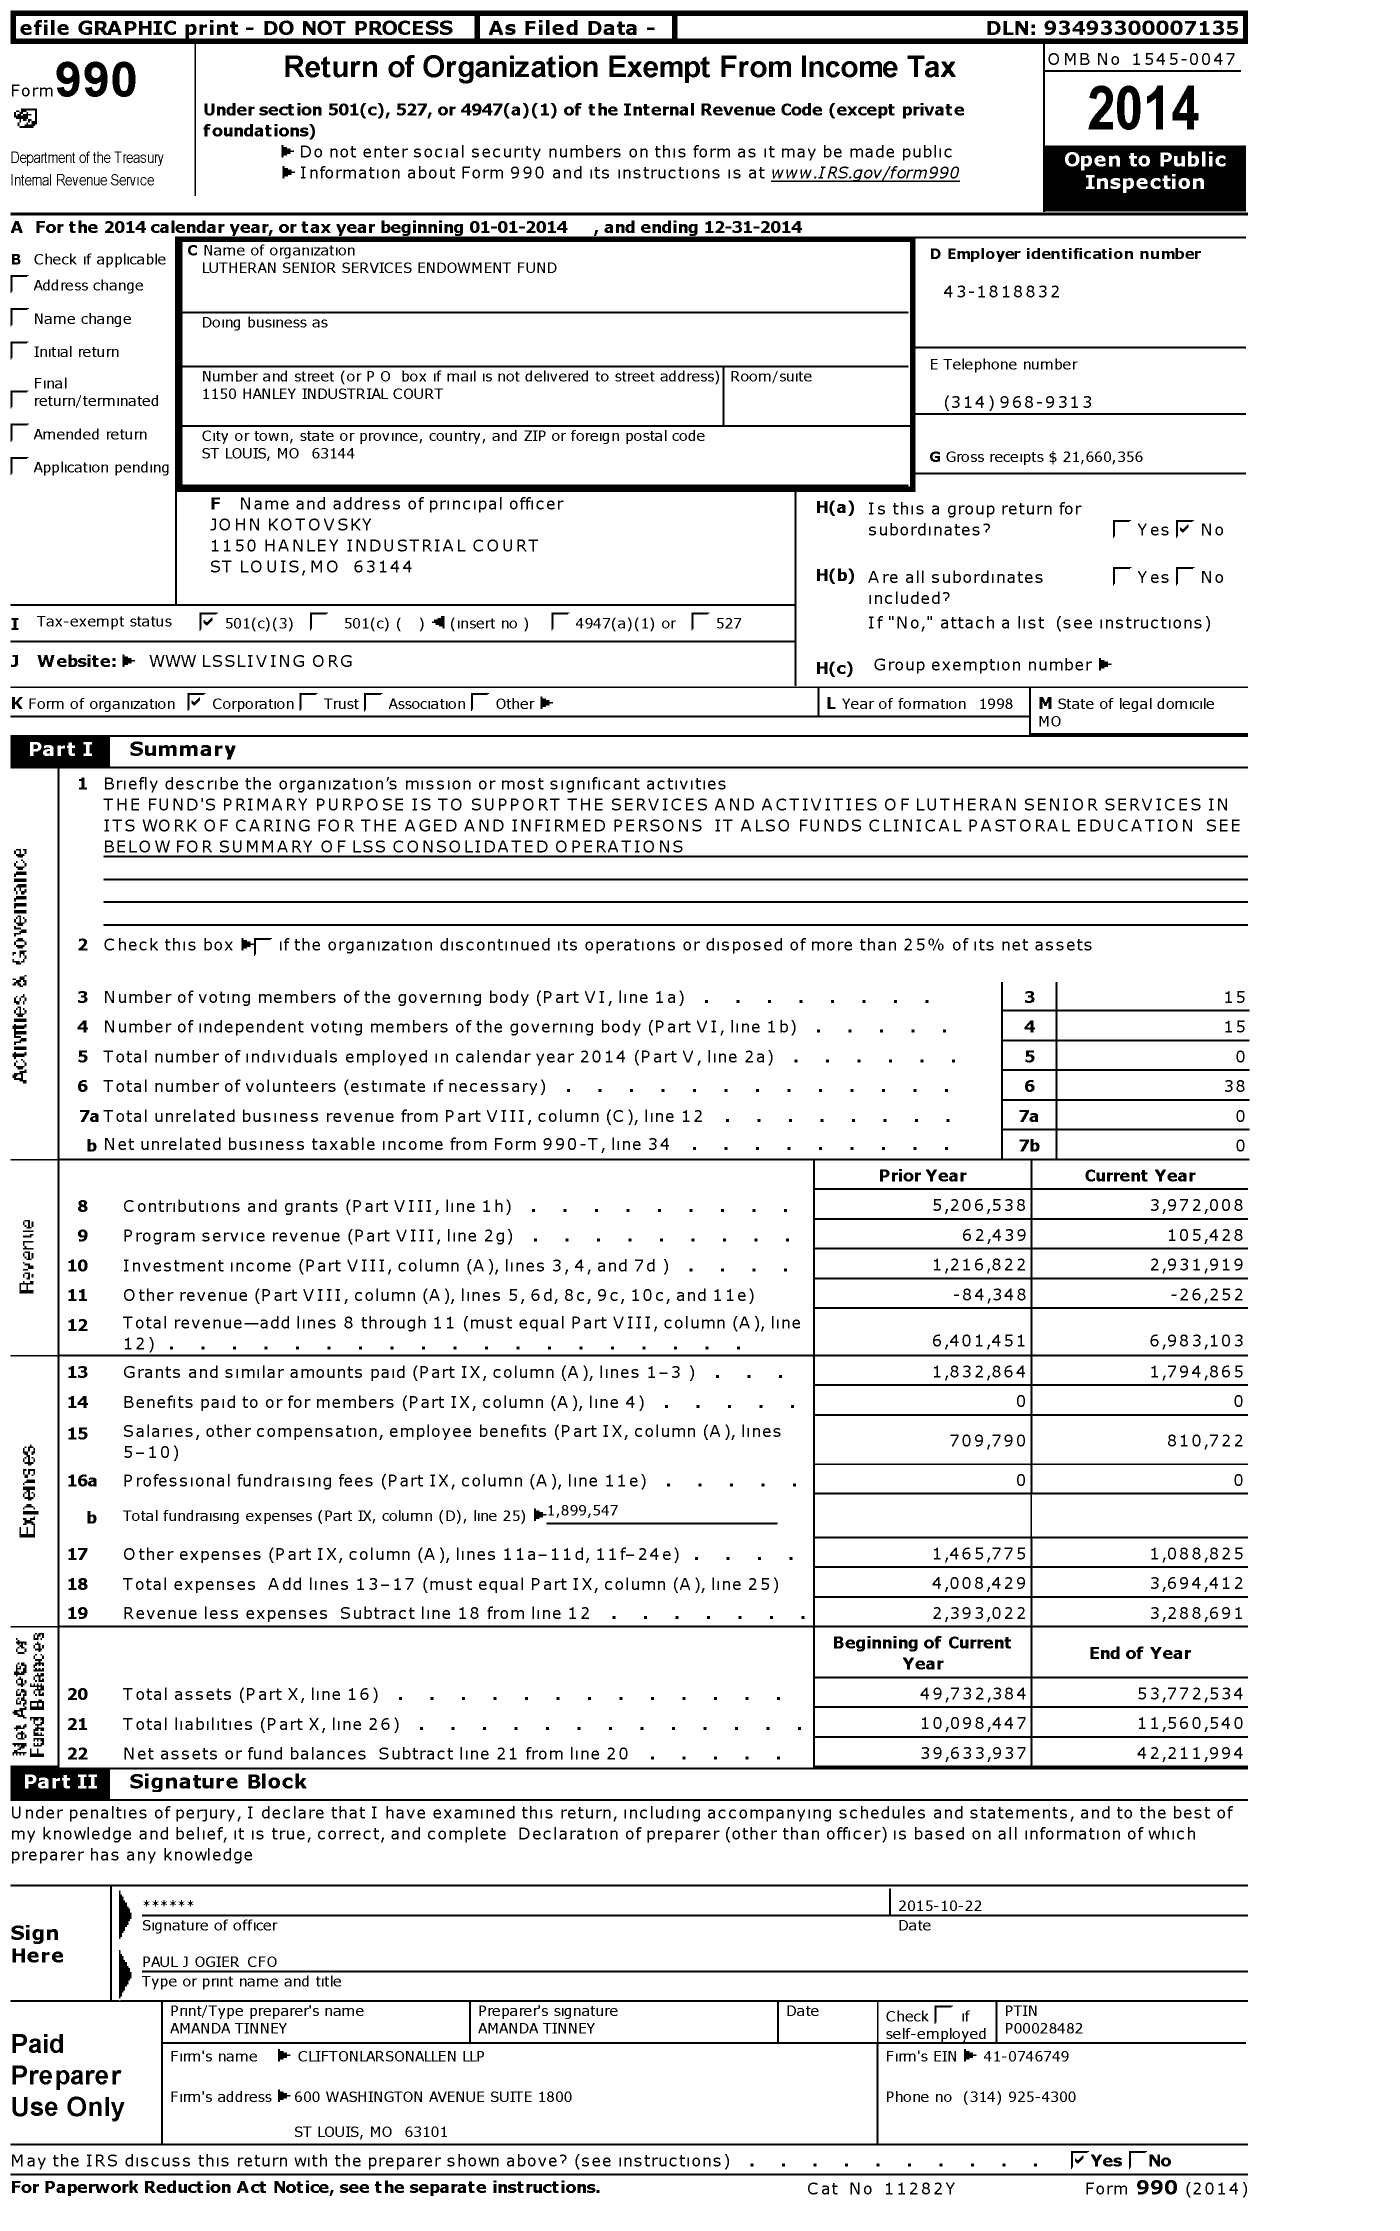 Image of first page of 2014 Form 990 for Lutheran Senior Services Endowment Fund (LSS)